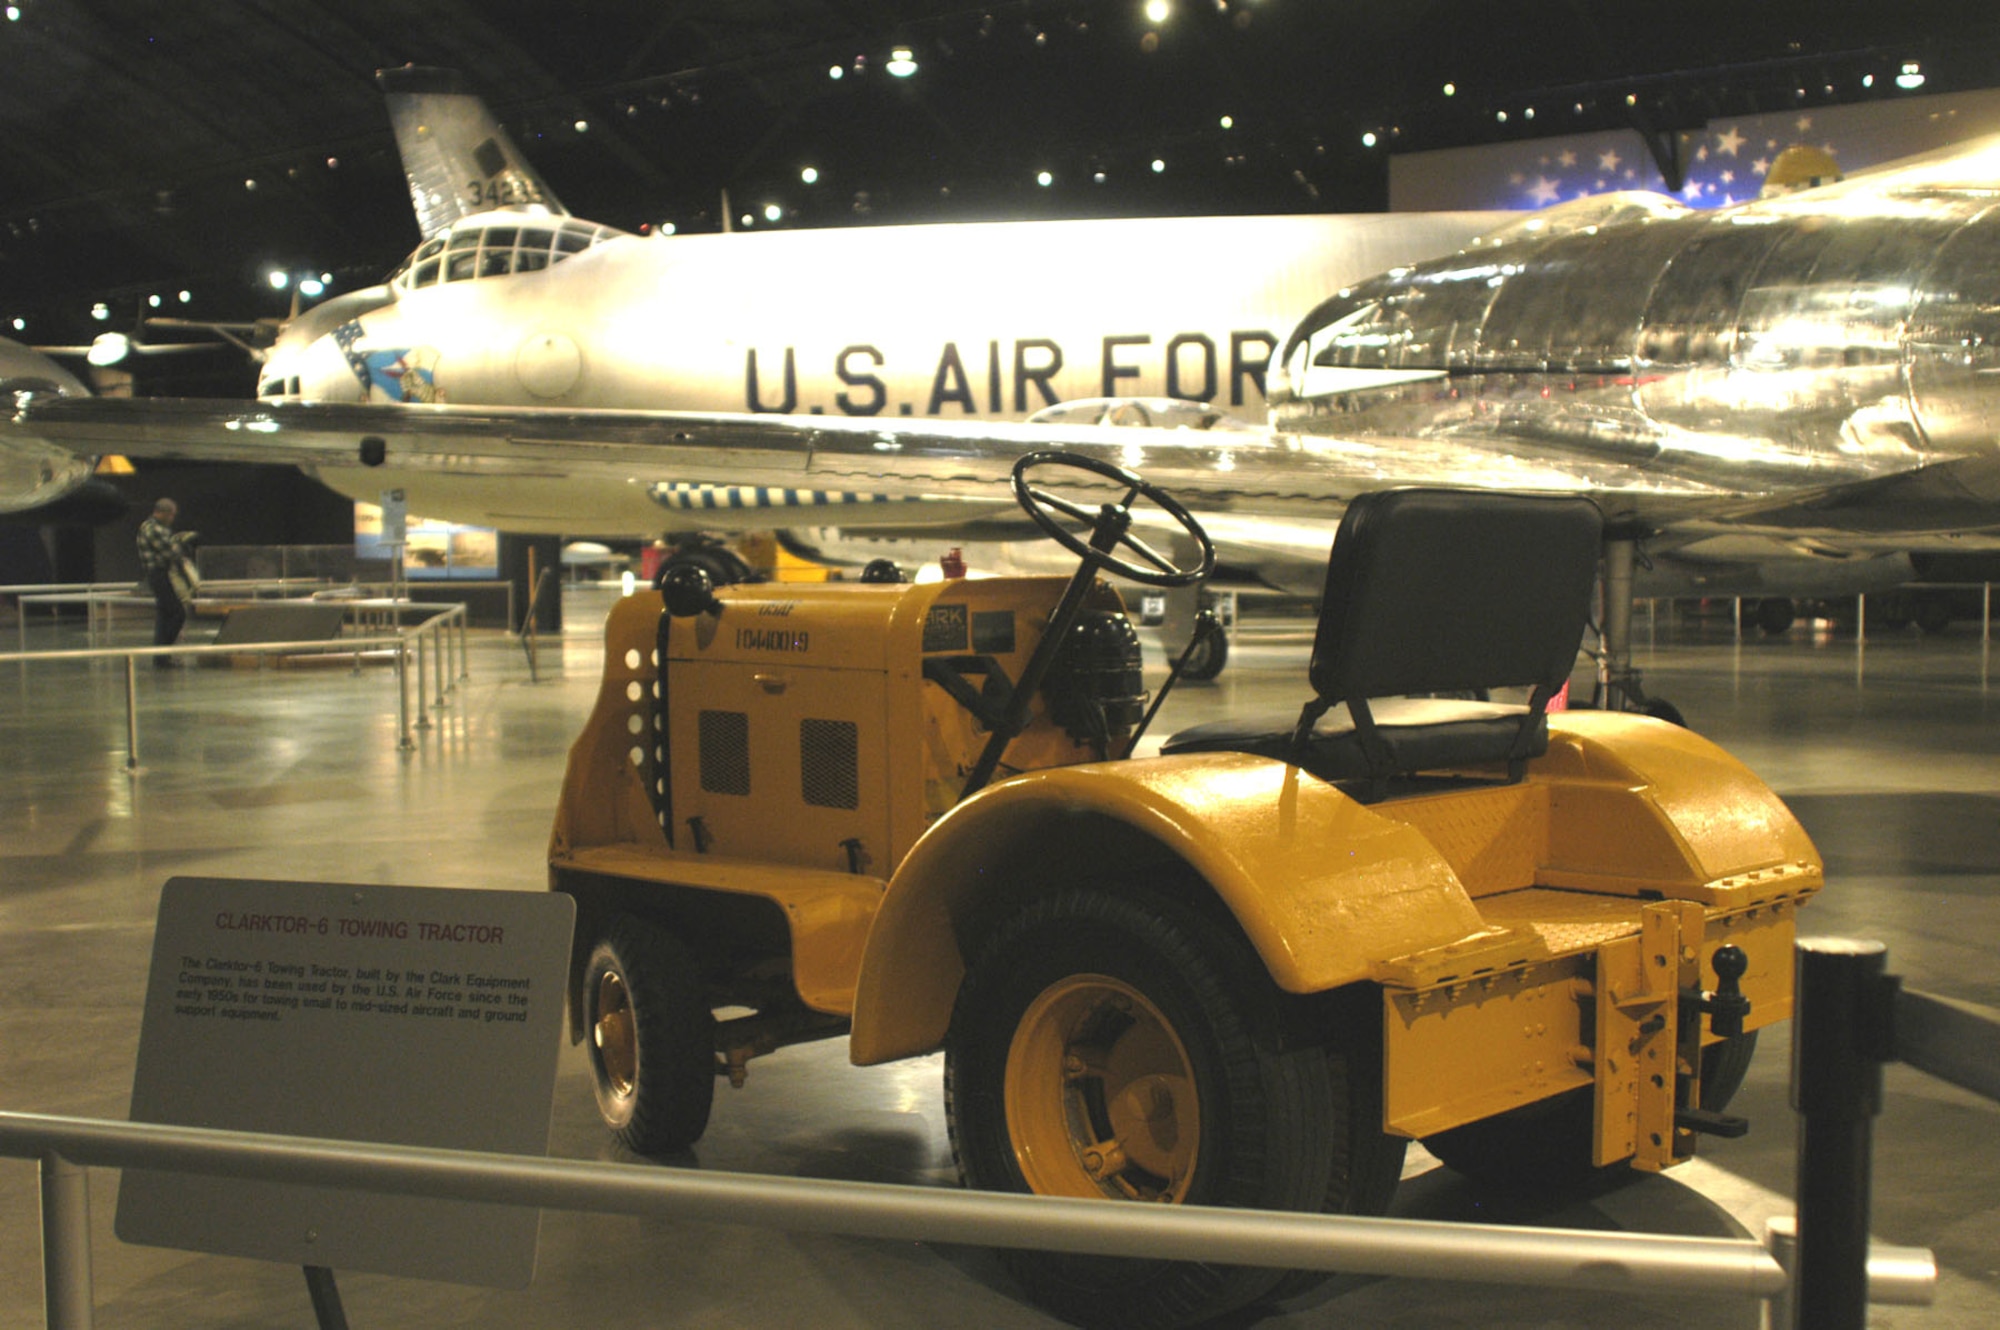 DAYTON, Ohio -- Clarktor-6 Towing Tractor on display in the Cold War Gallery at the National Museum of the United States Air Force. (U.S. Air Force photo)